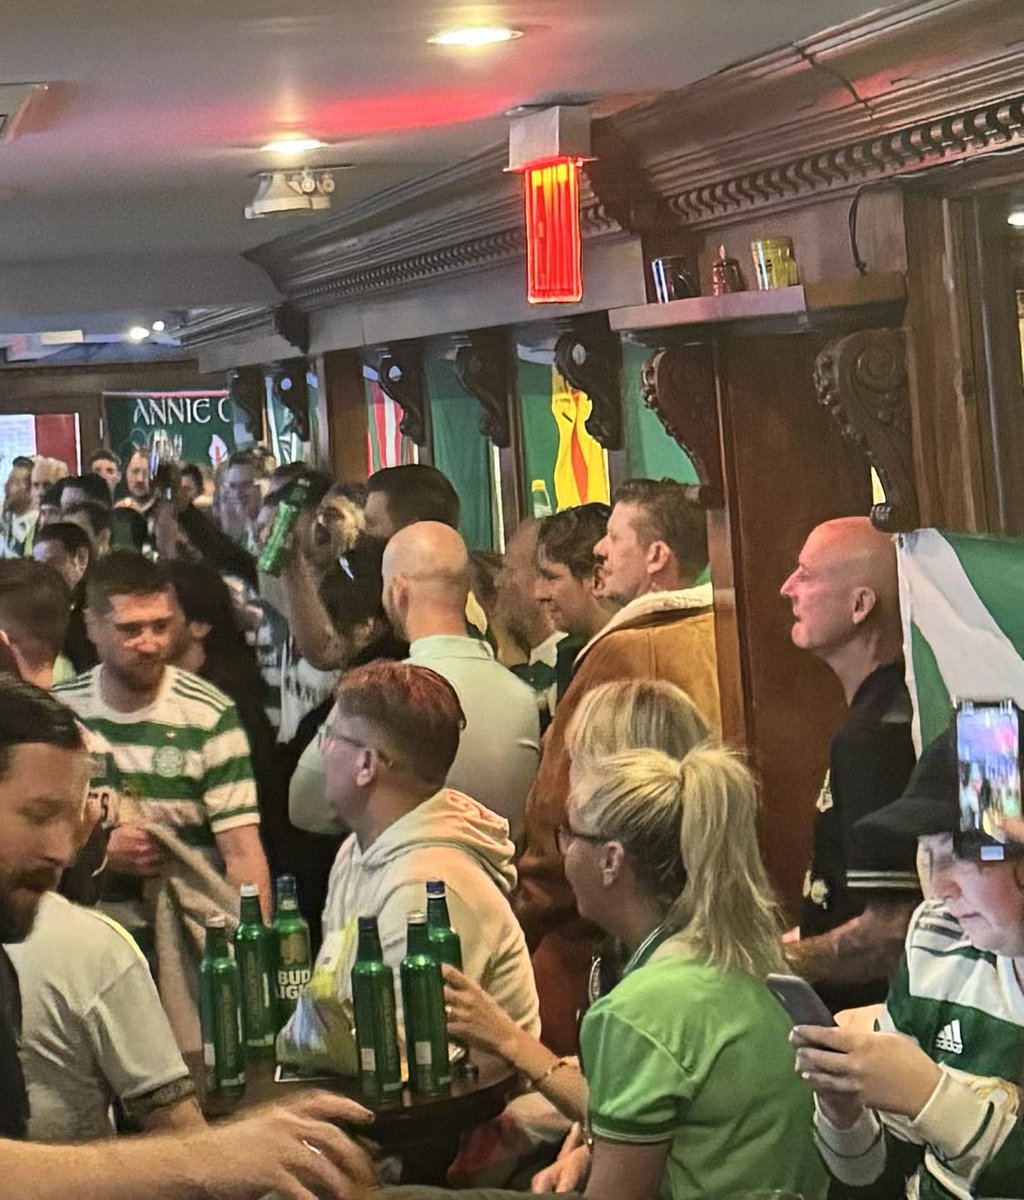 It’s been a while since I’ve been in a New York pub at 6 o’clock in the morning. Could be in Glasgow. Come on Celtic!